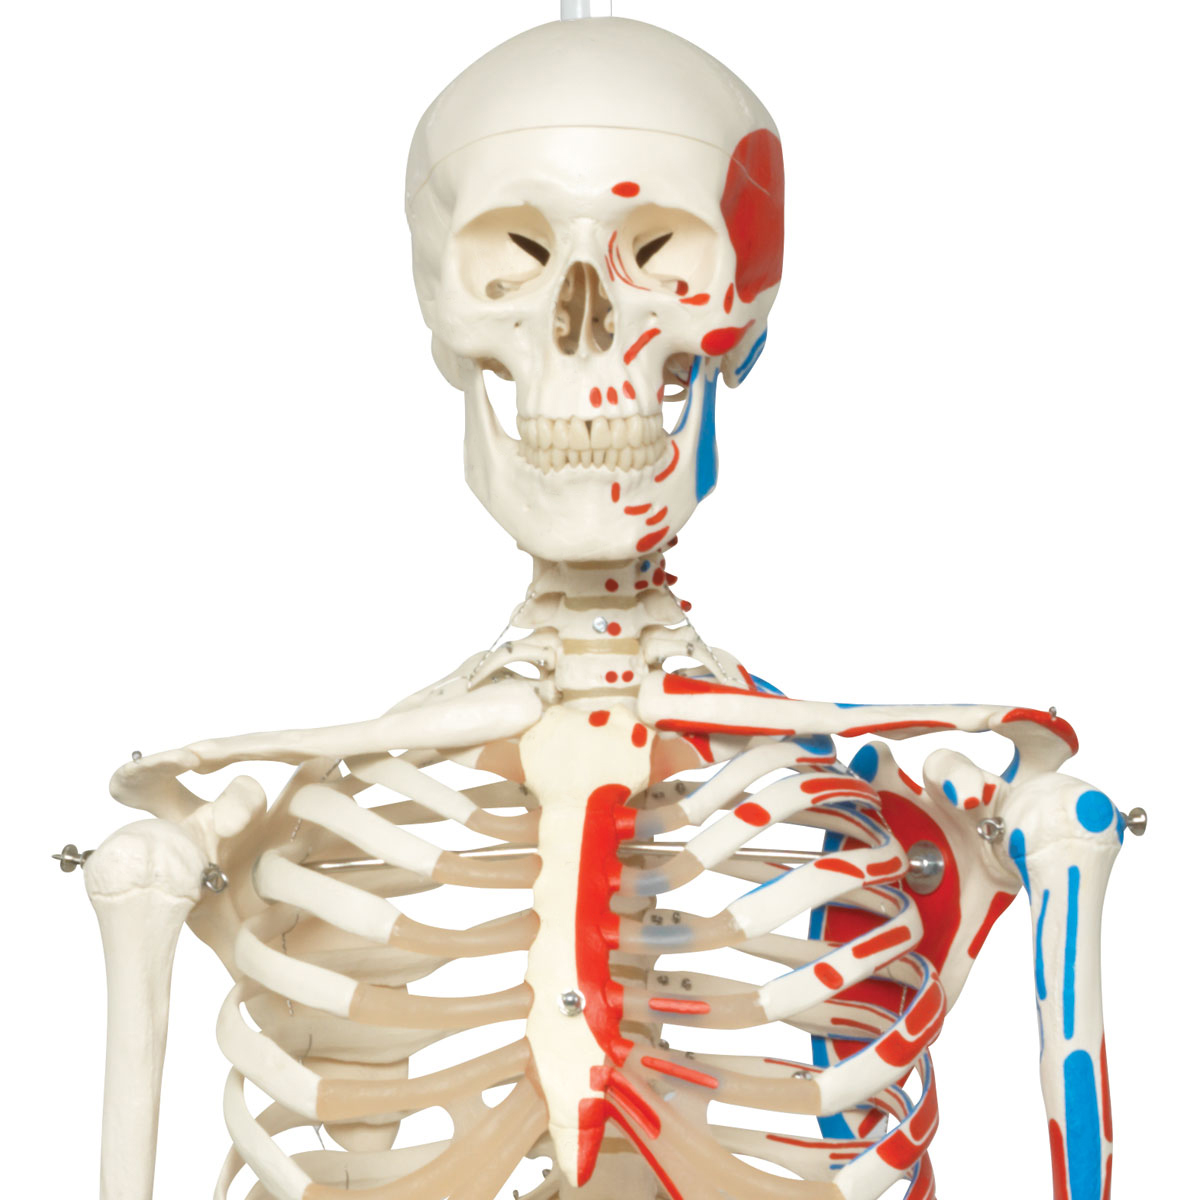 Detailed Product Manual Axis Scientific Painted and Numbered Life Size Skeleton Model Dust Cover 3-Year Warranty Full Size Human Skeleton has Muscle Insertion and Origin Points Includes Base